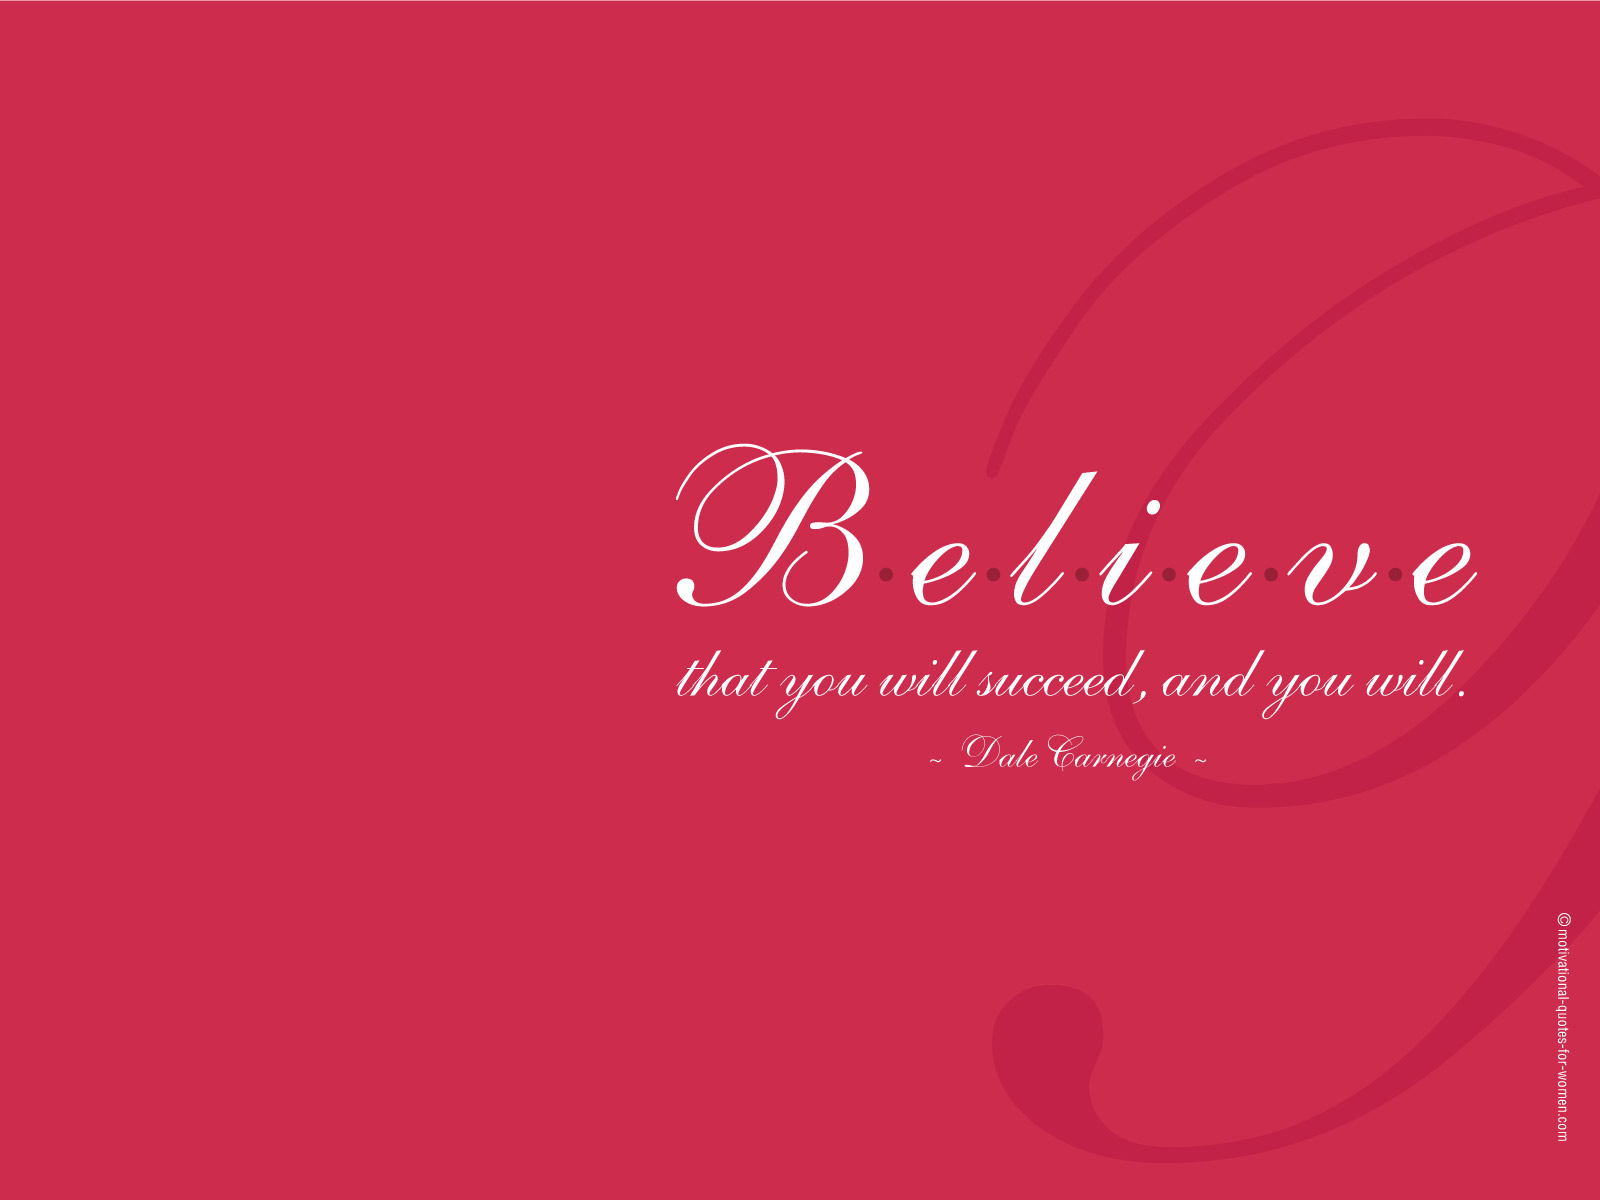 Believe Quotes Wallpaper In High Resolution For This